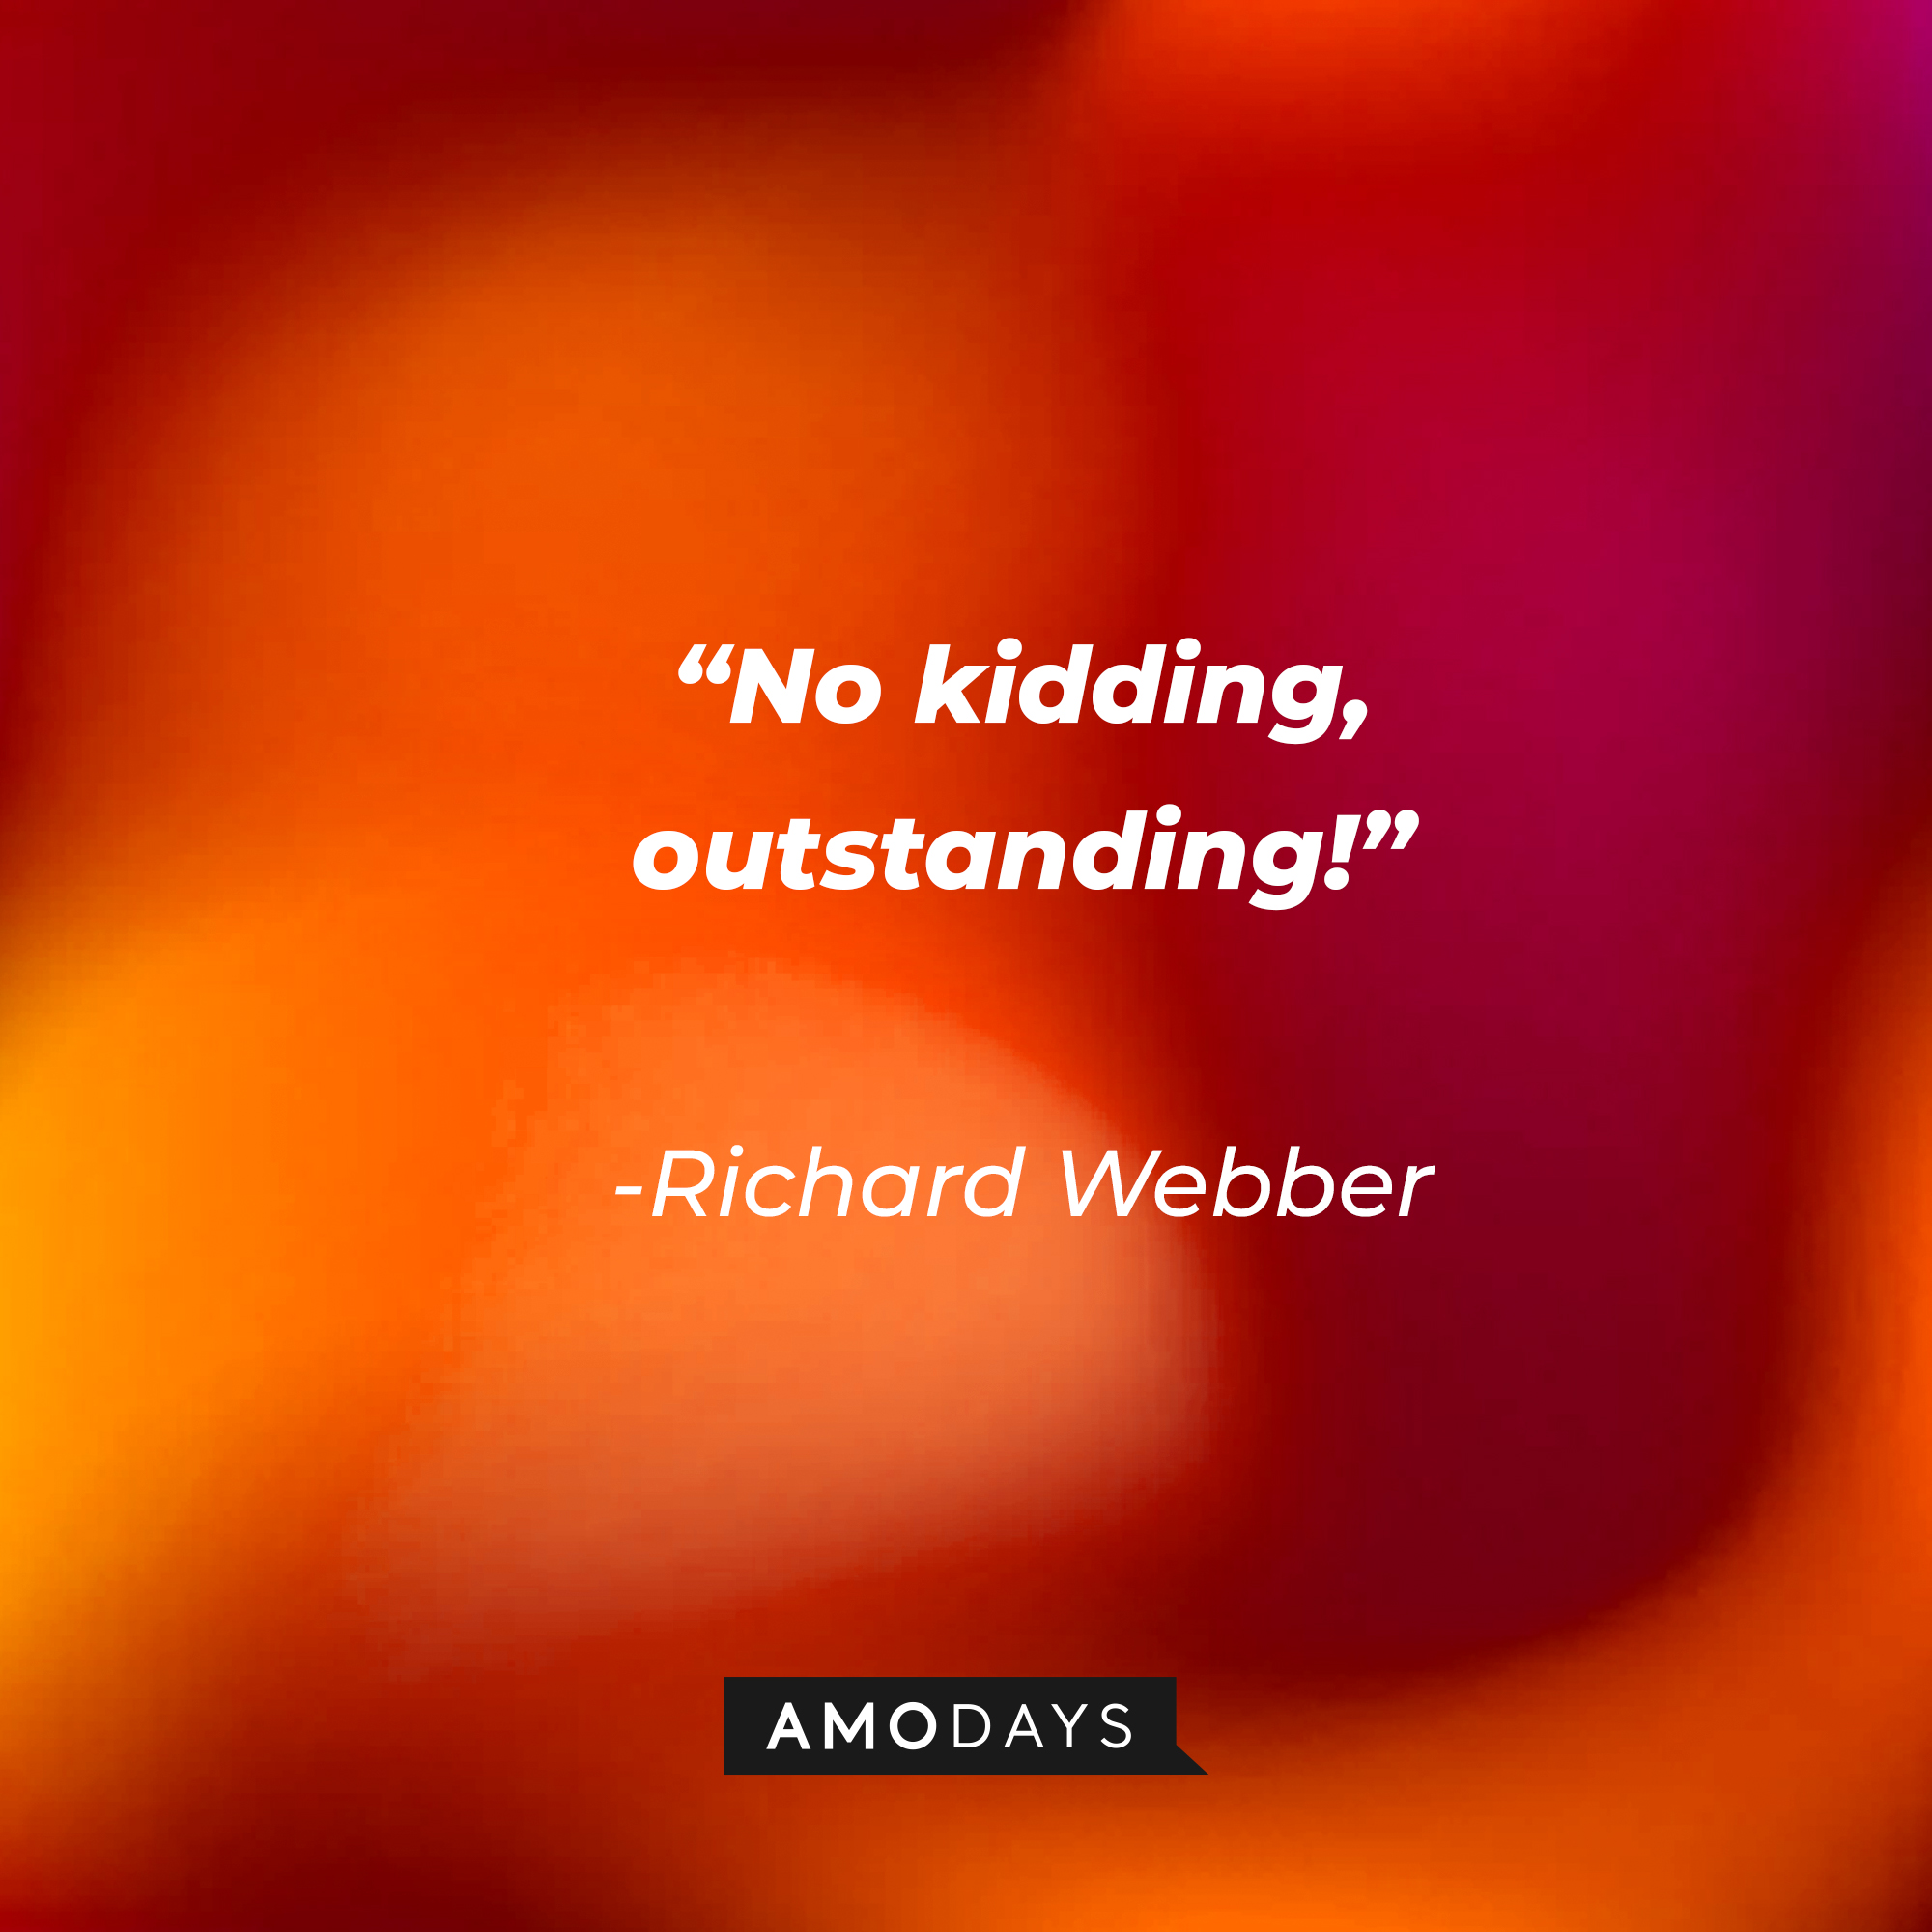 Richard Webber with his quote: "No kidding, outstanding!" | Source: Amodays